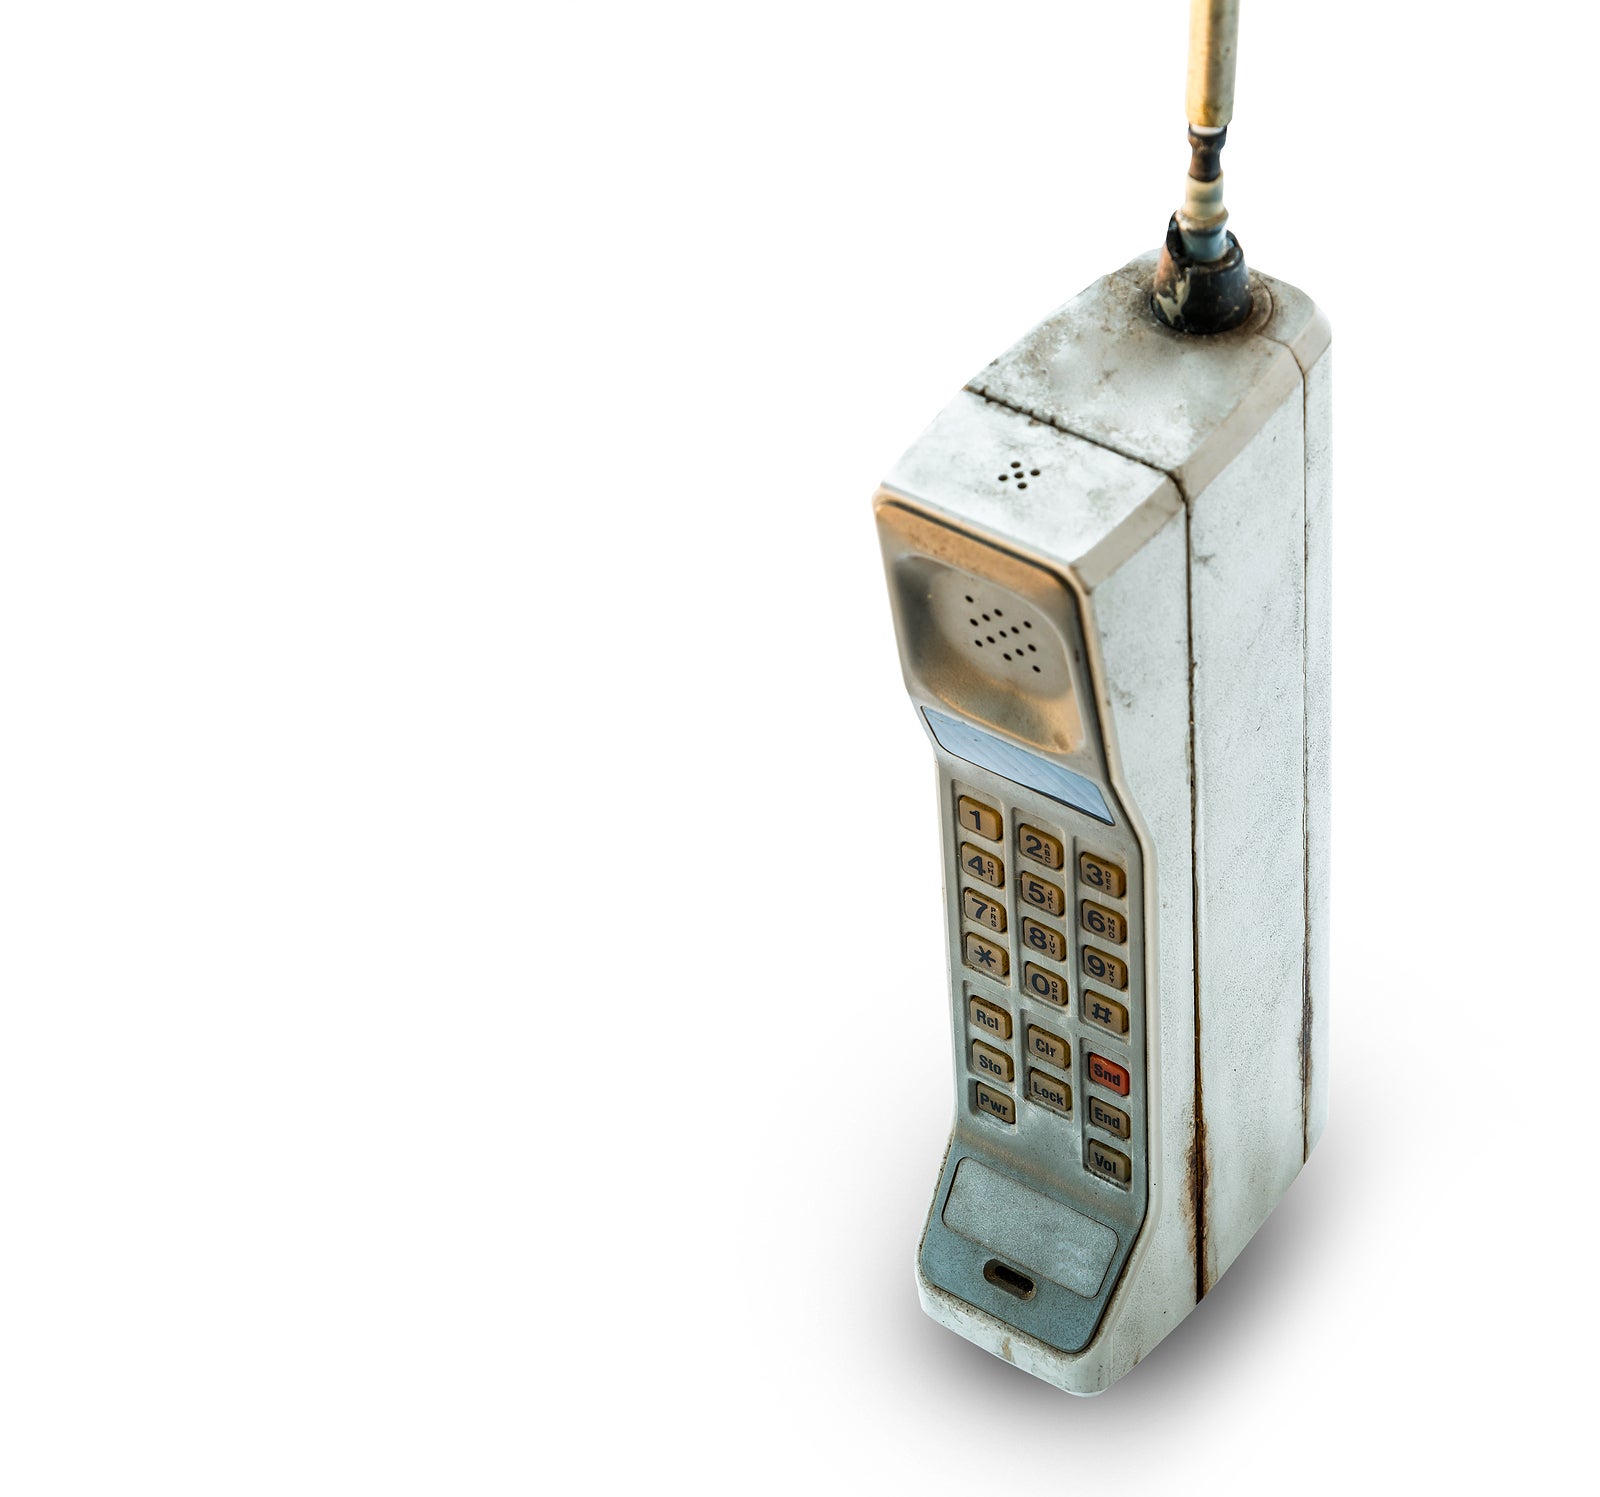 The First Mobile Phone